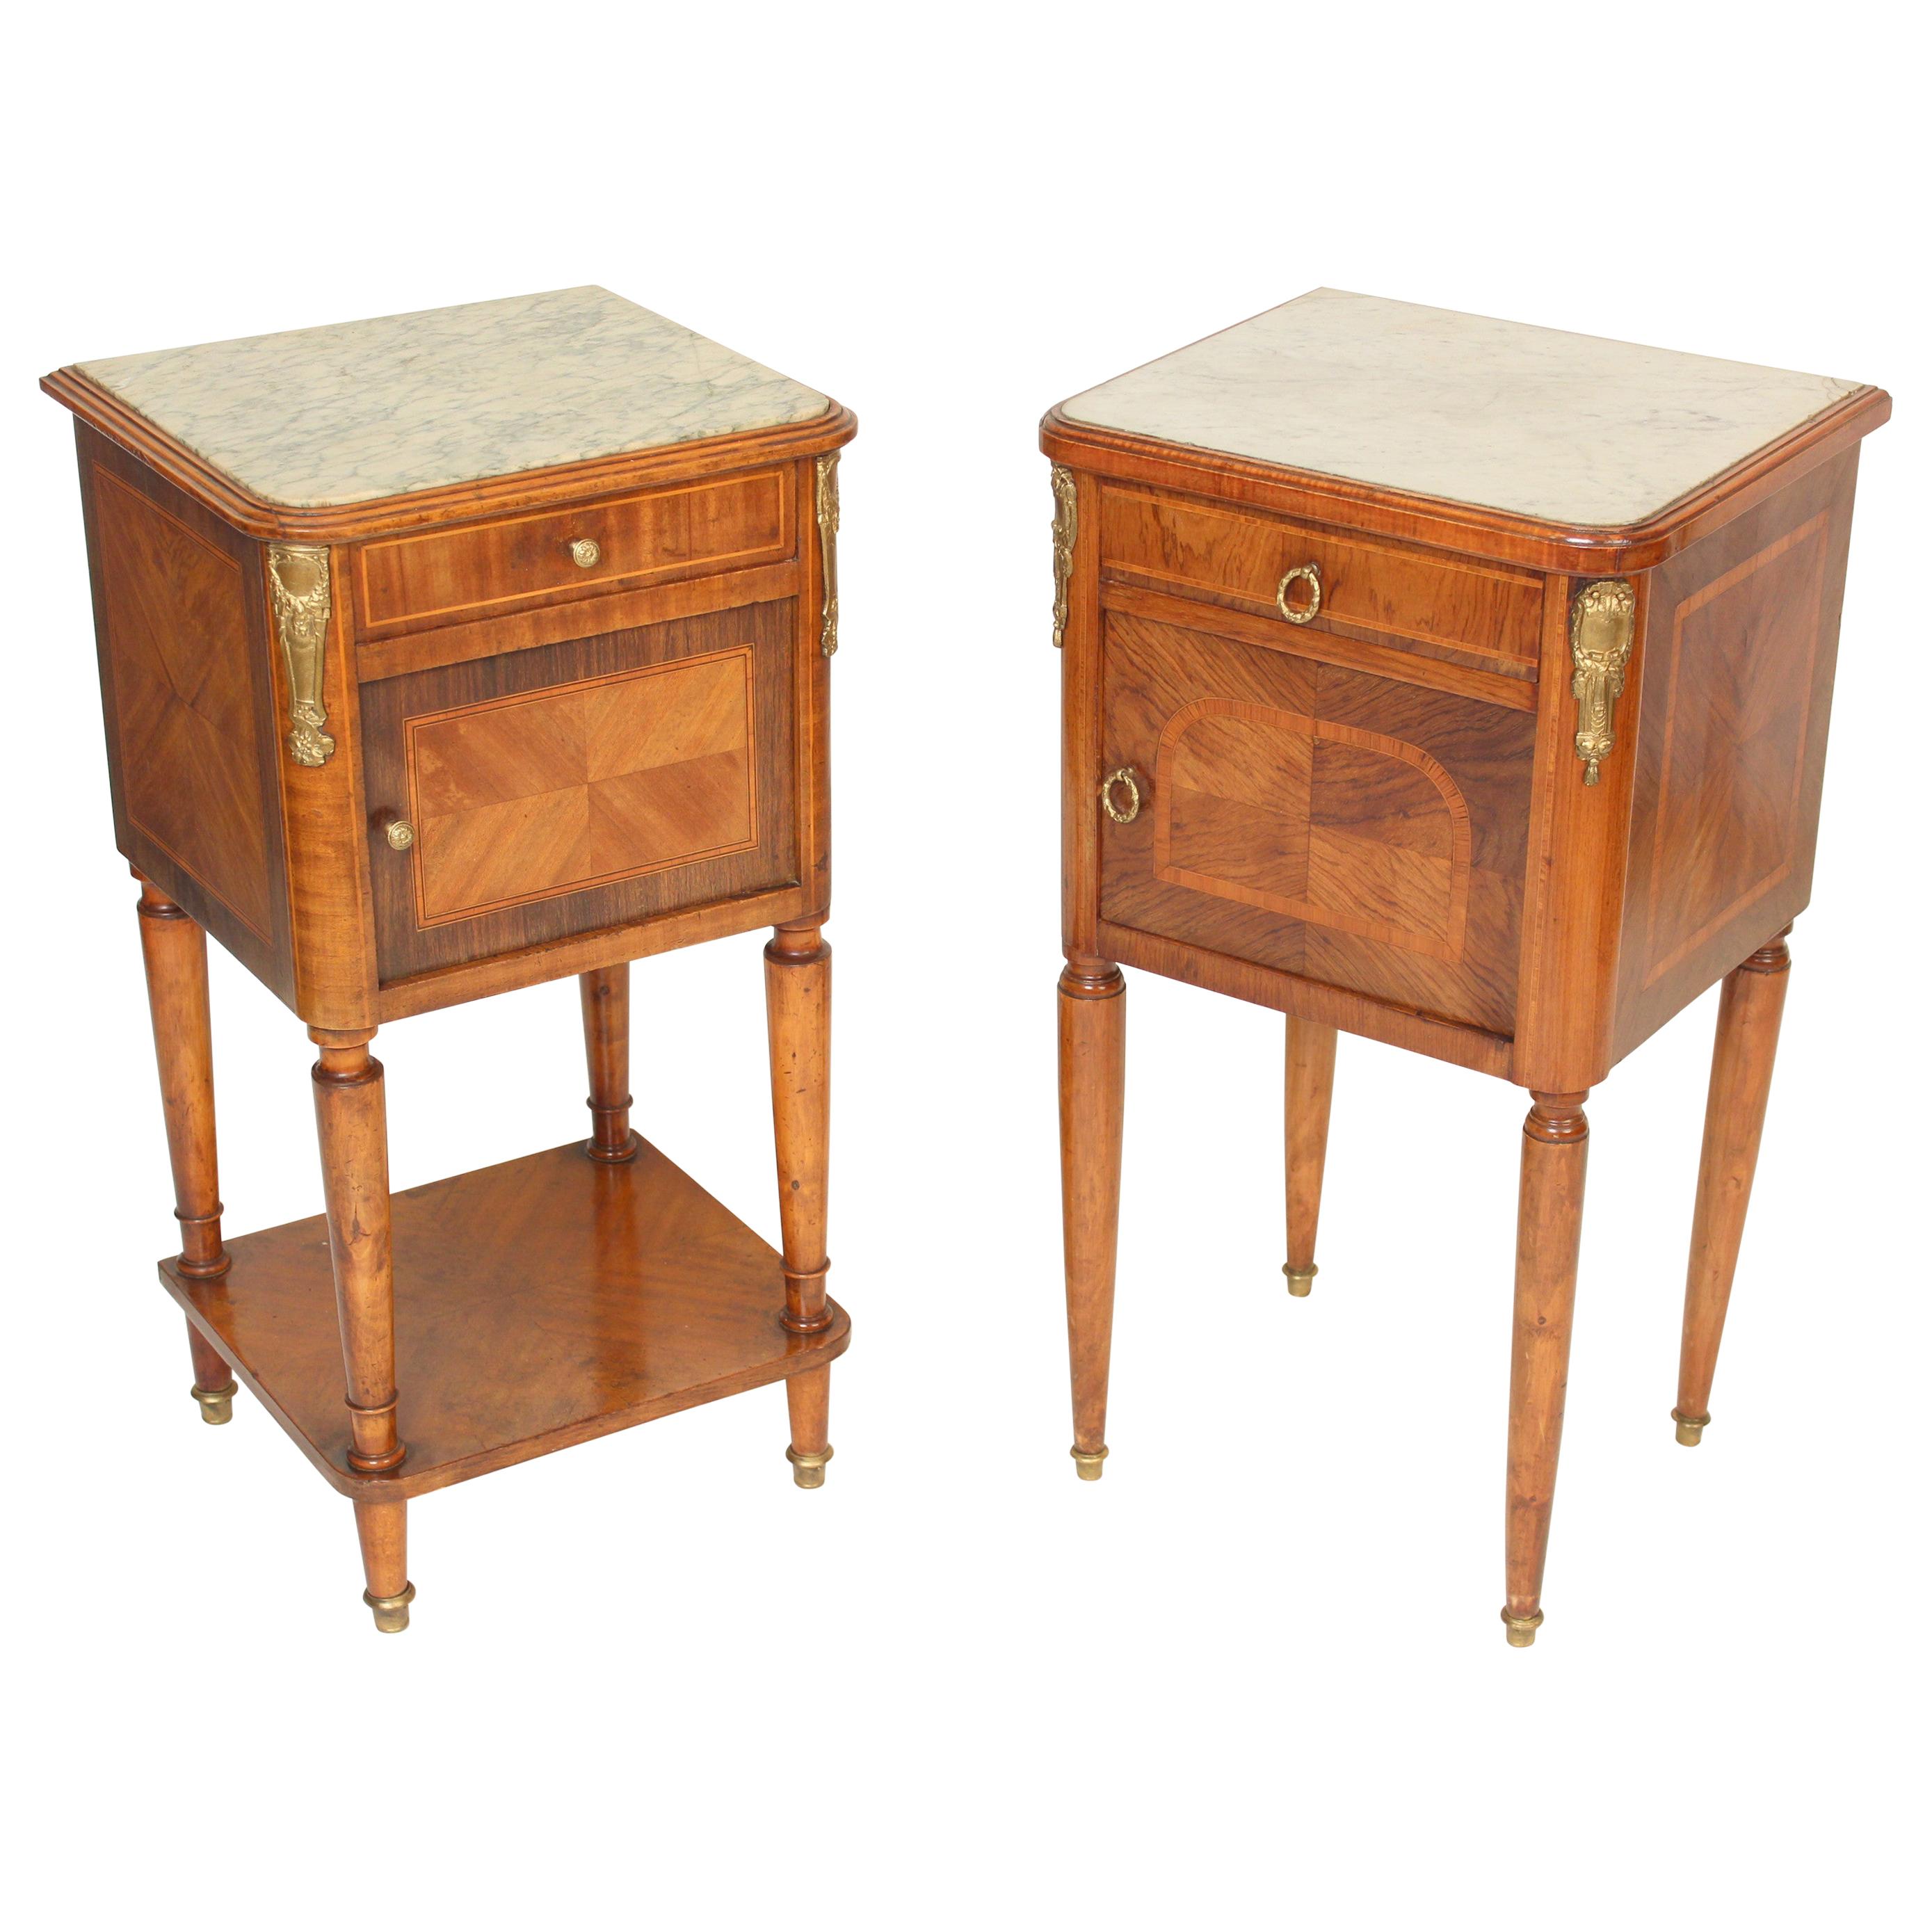 Matched Pair of Louis XVI Style Occasional Tables